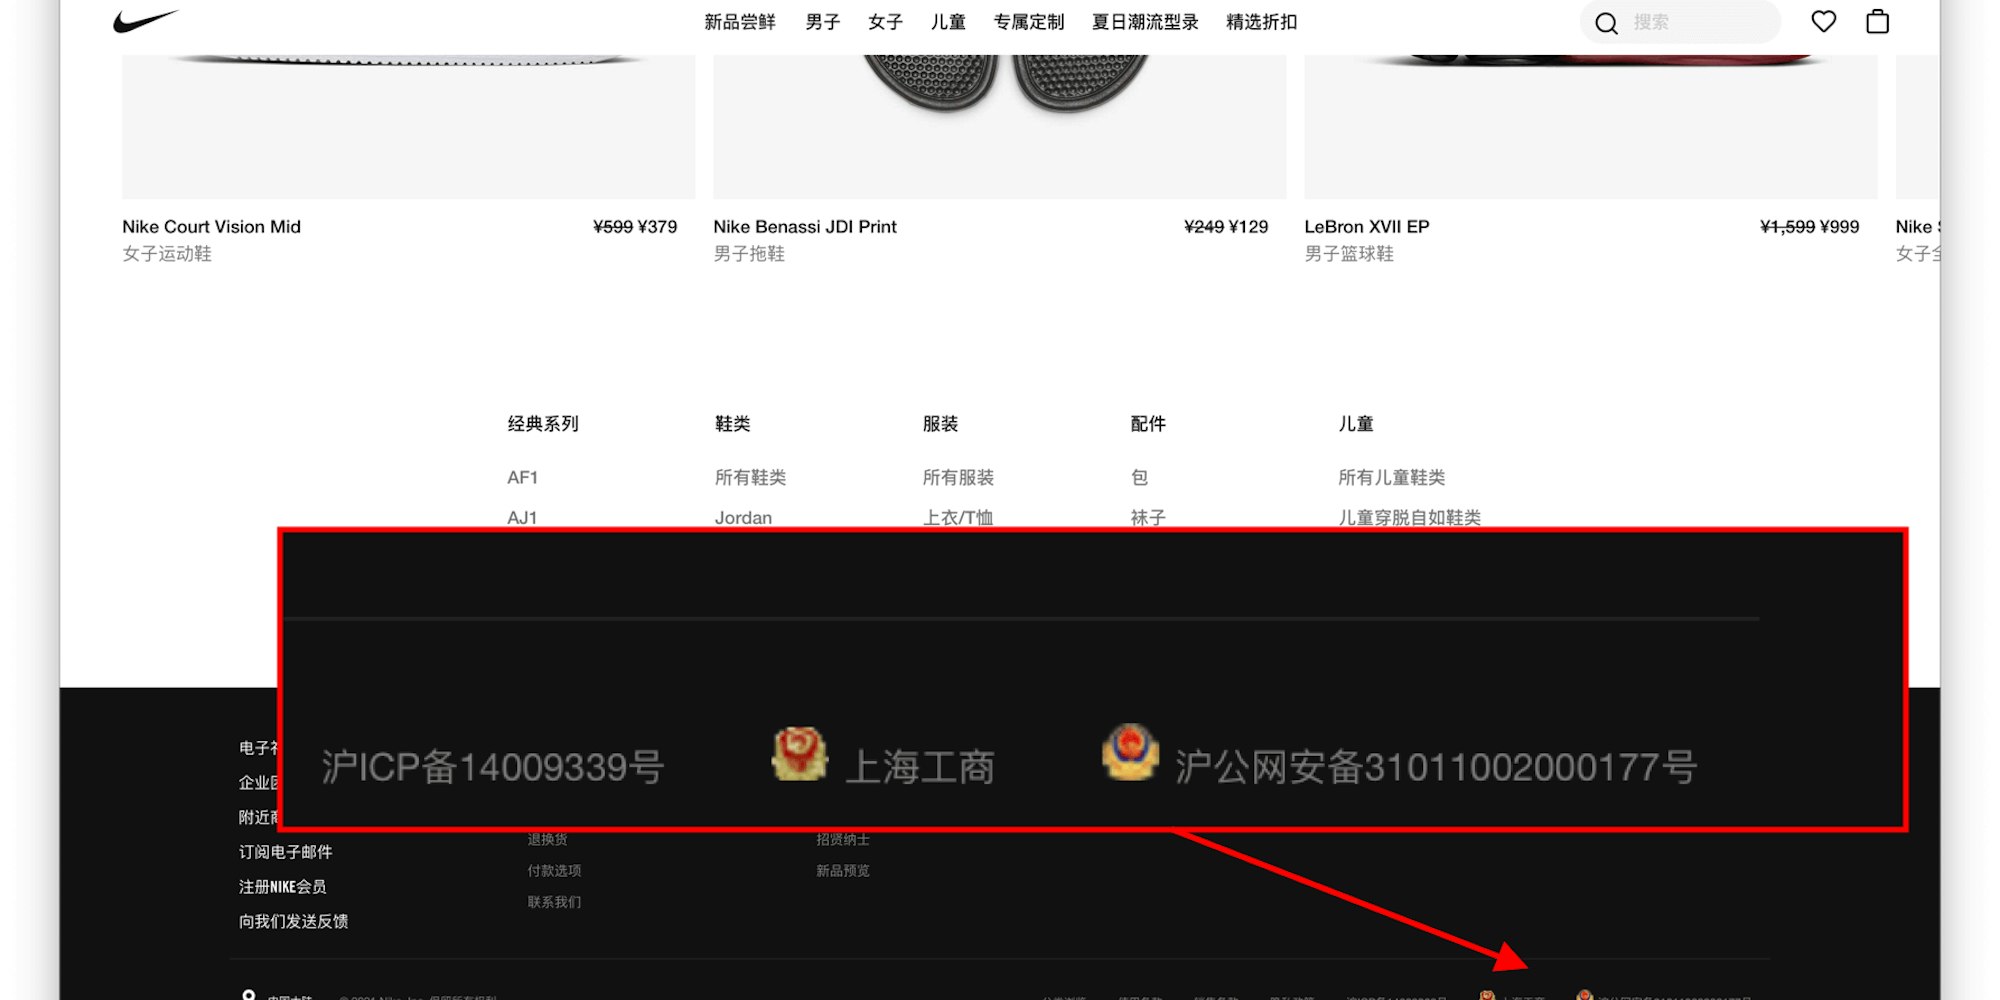 Example of Nike's ICP License in China